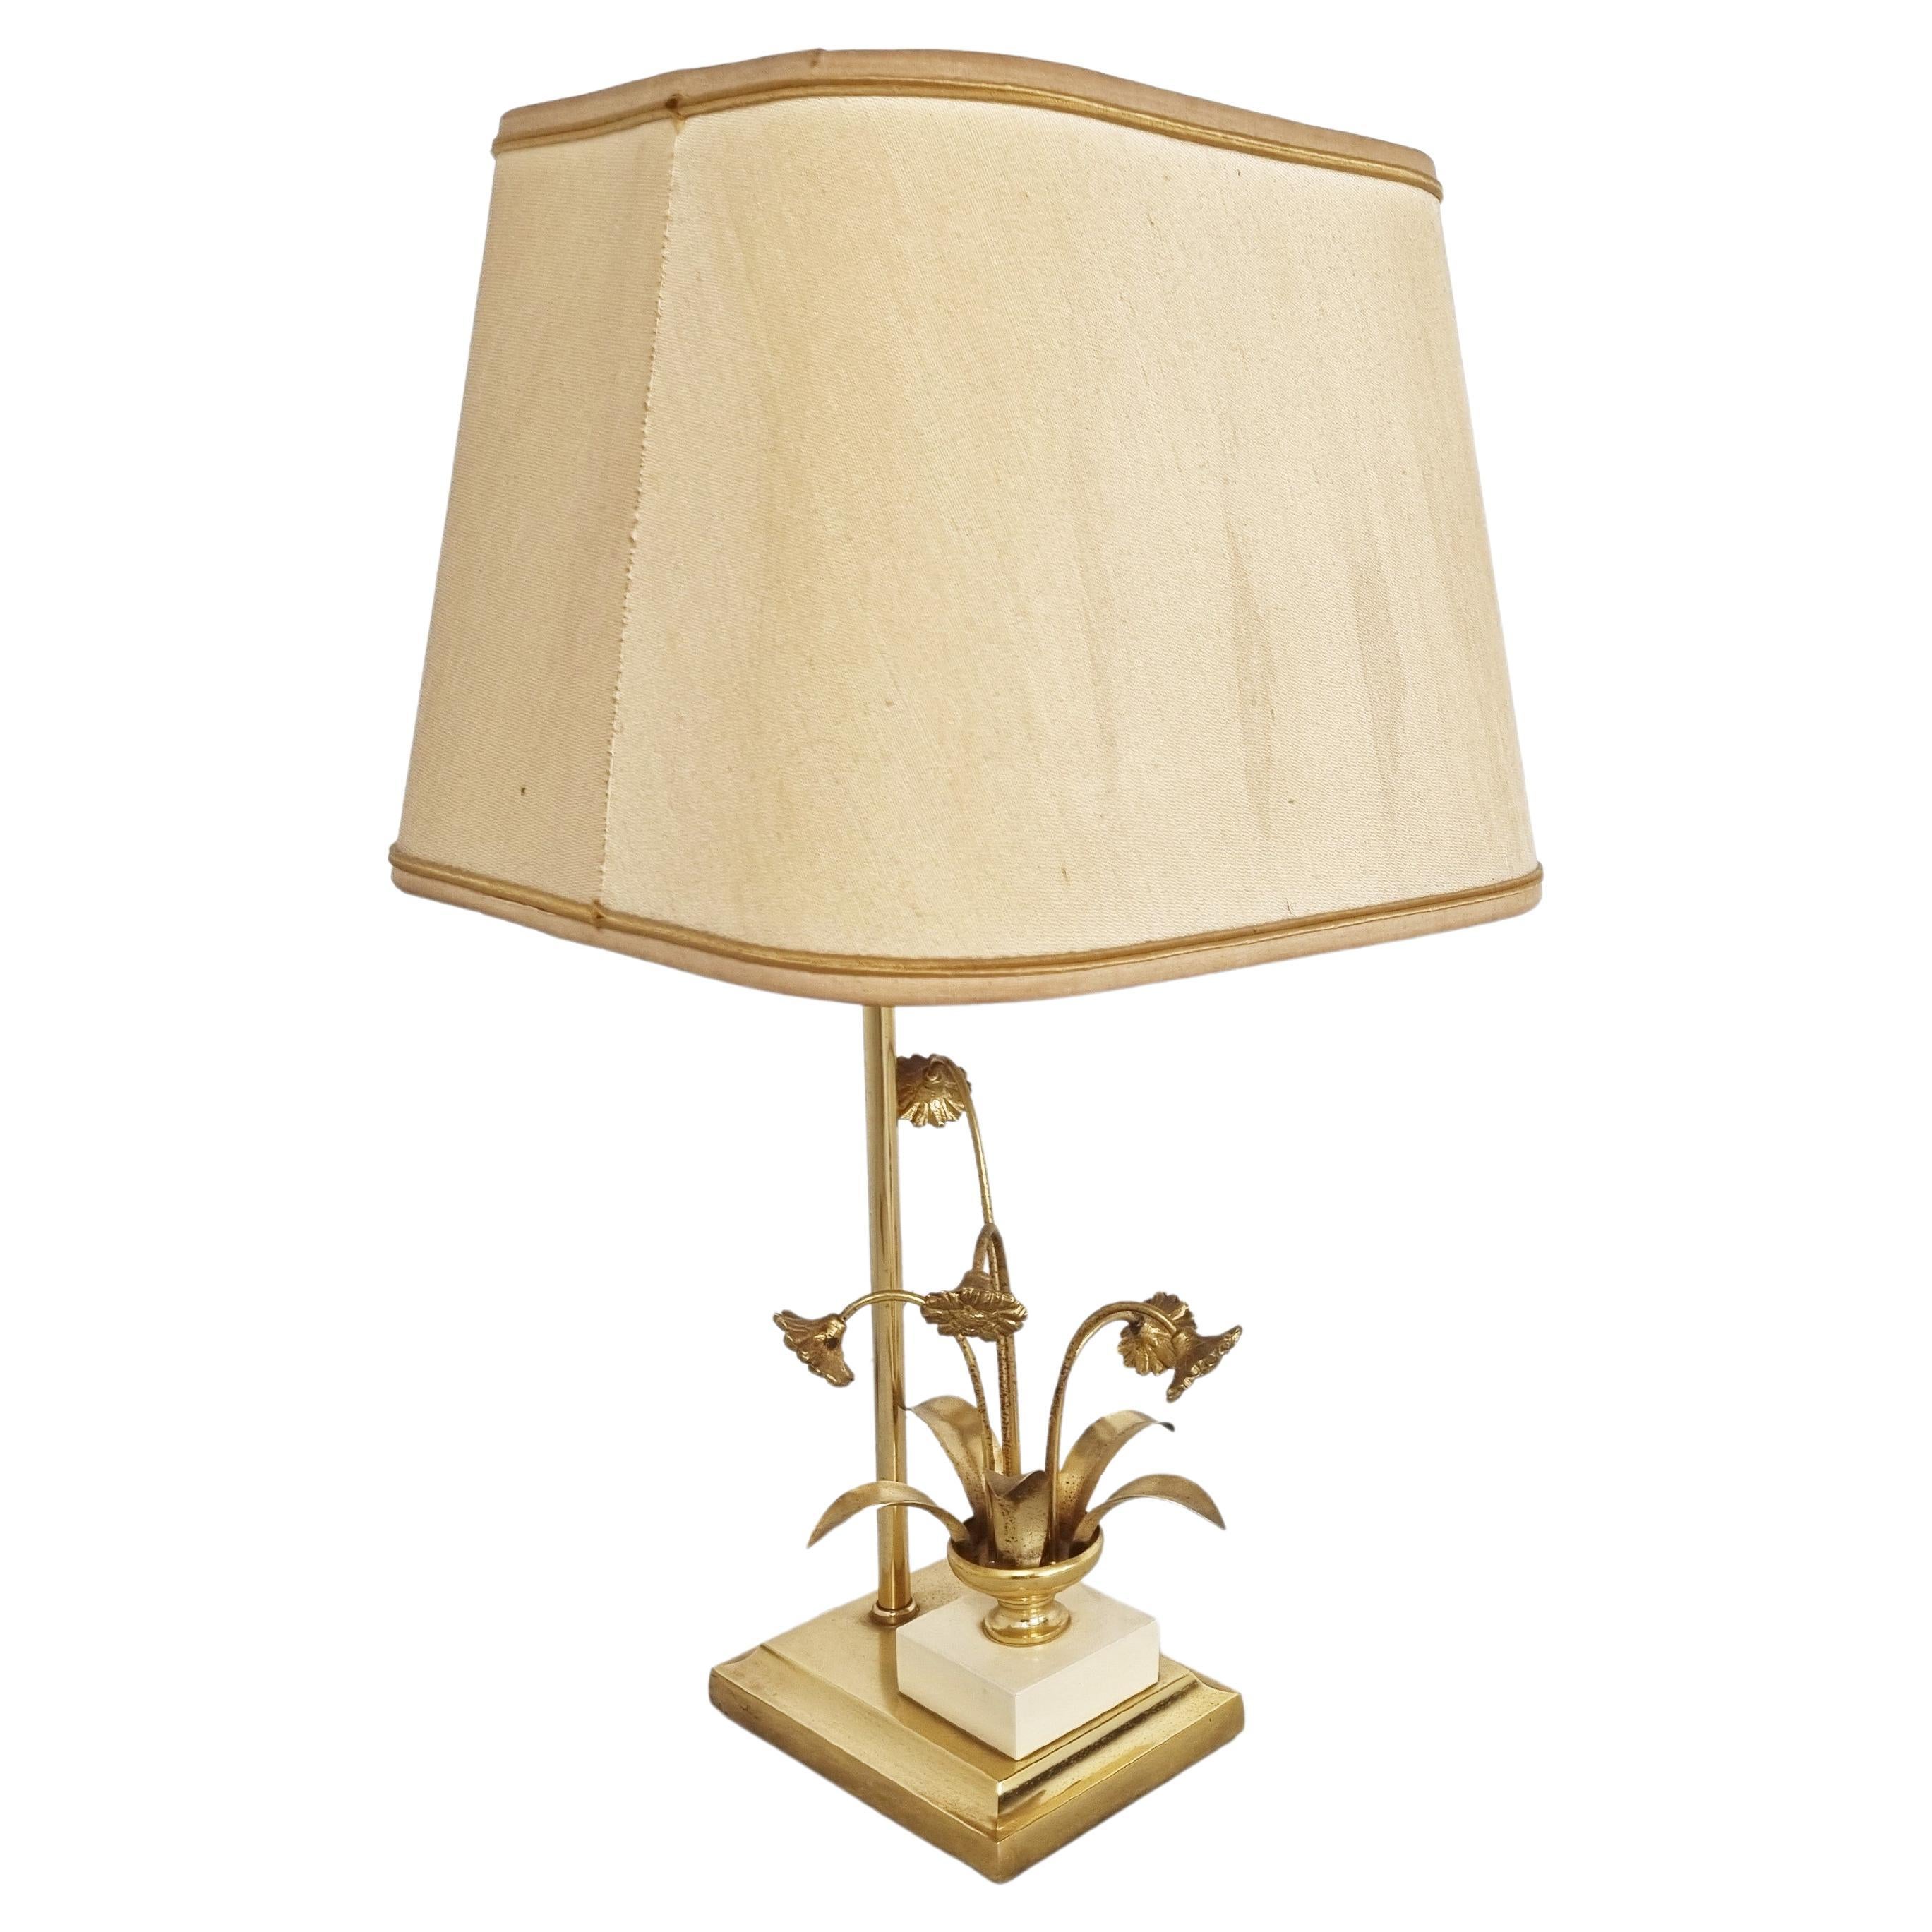 Vintage Brass Flower Table Lamp by Massive, 1970s For Sale